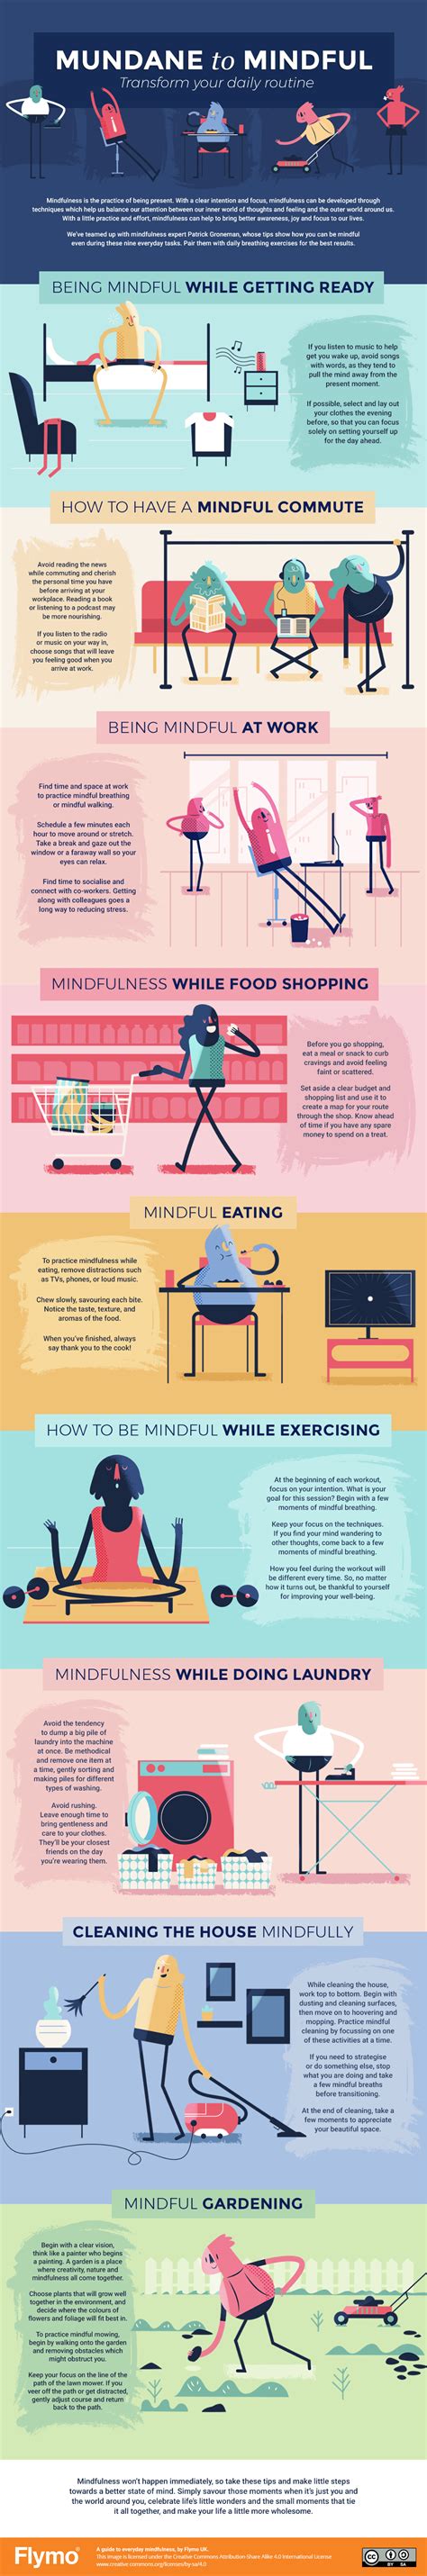 Infographic Making Mindfulness A Way Of Life And Work Hppy